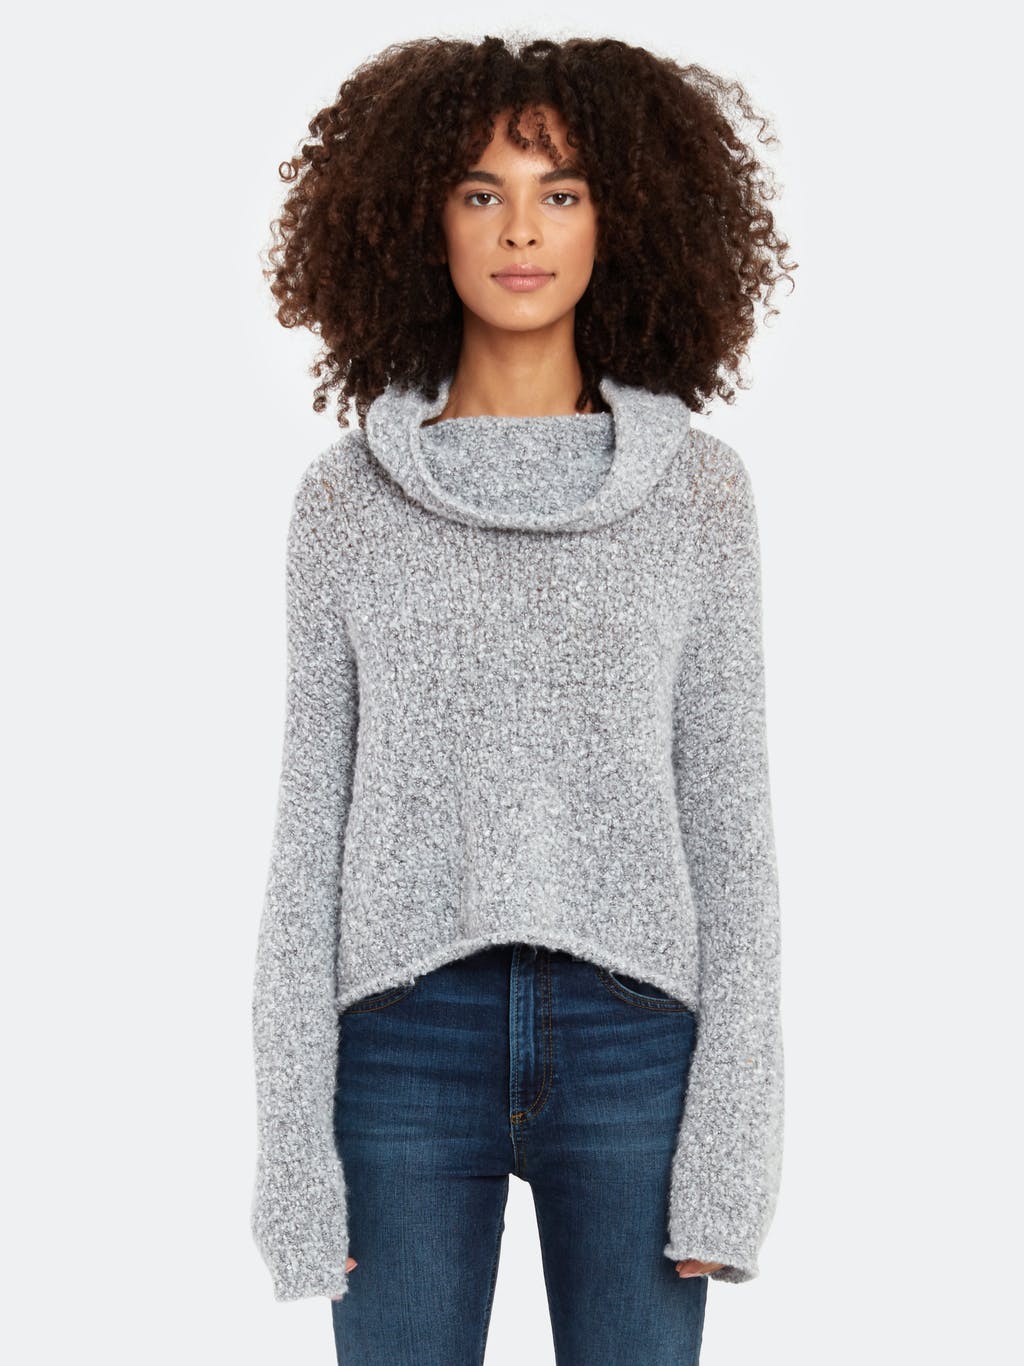 BFF Cowl Neck Slouchy Sweater